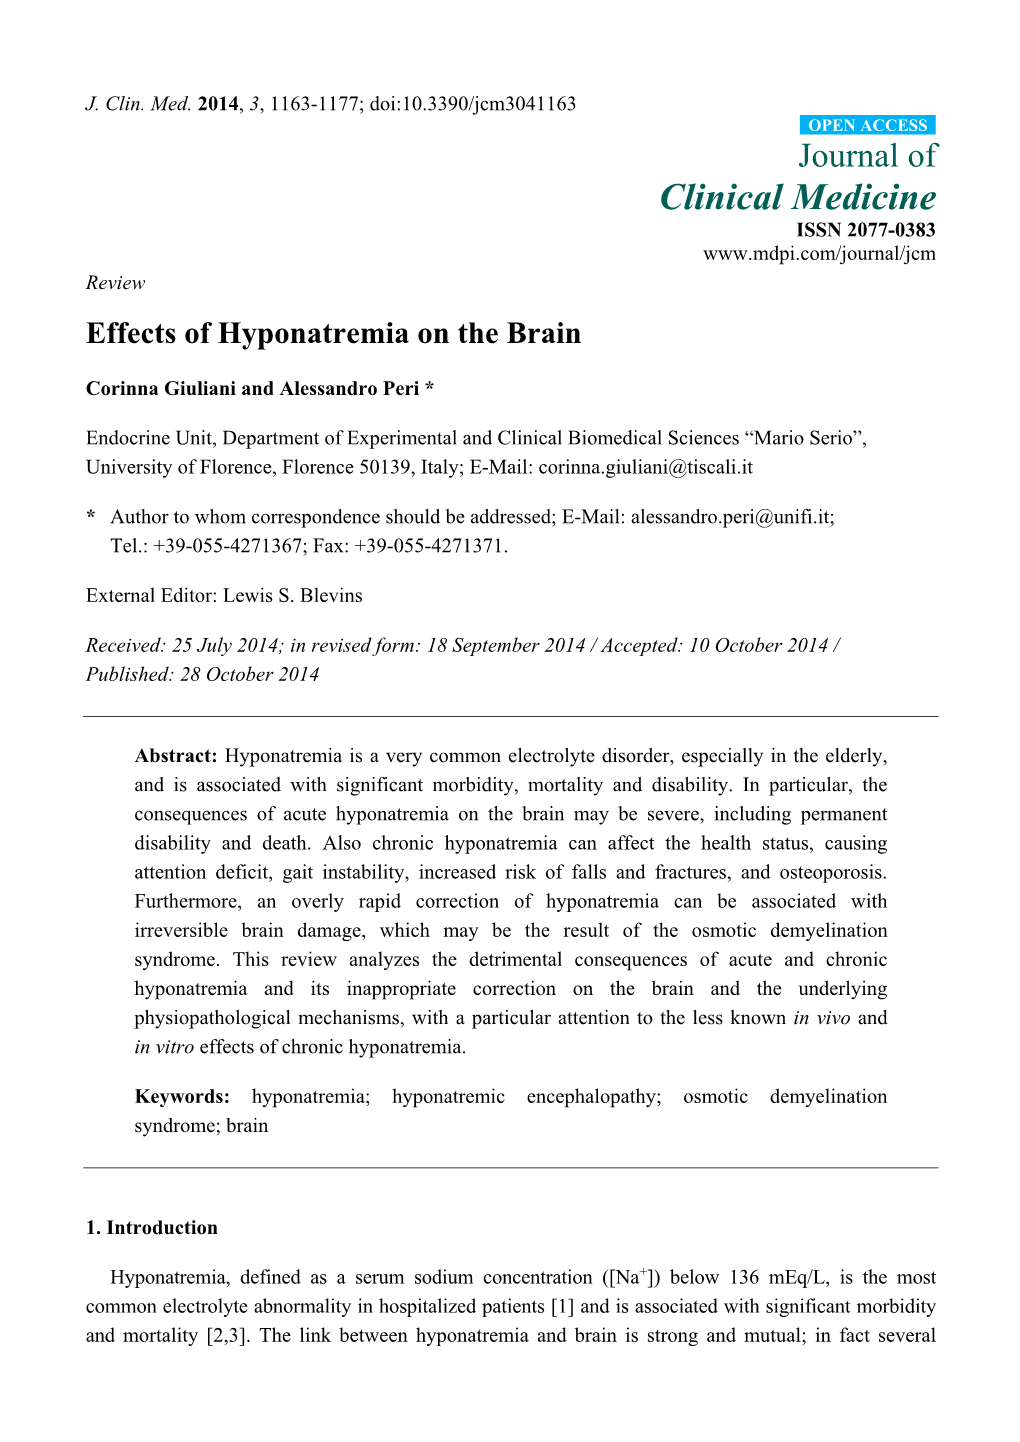 Effects of Hyponatremia on the Brain